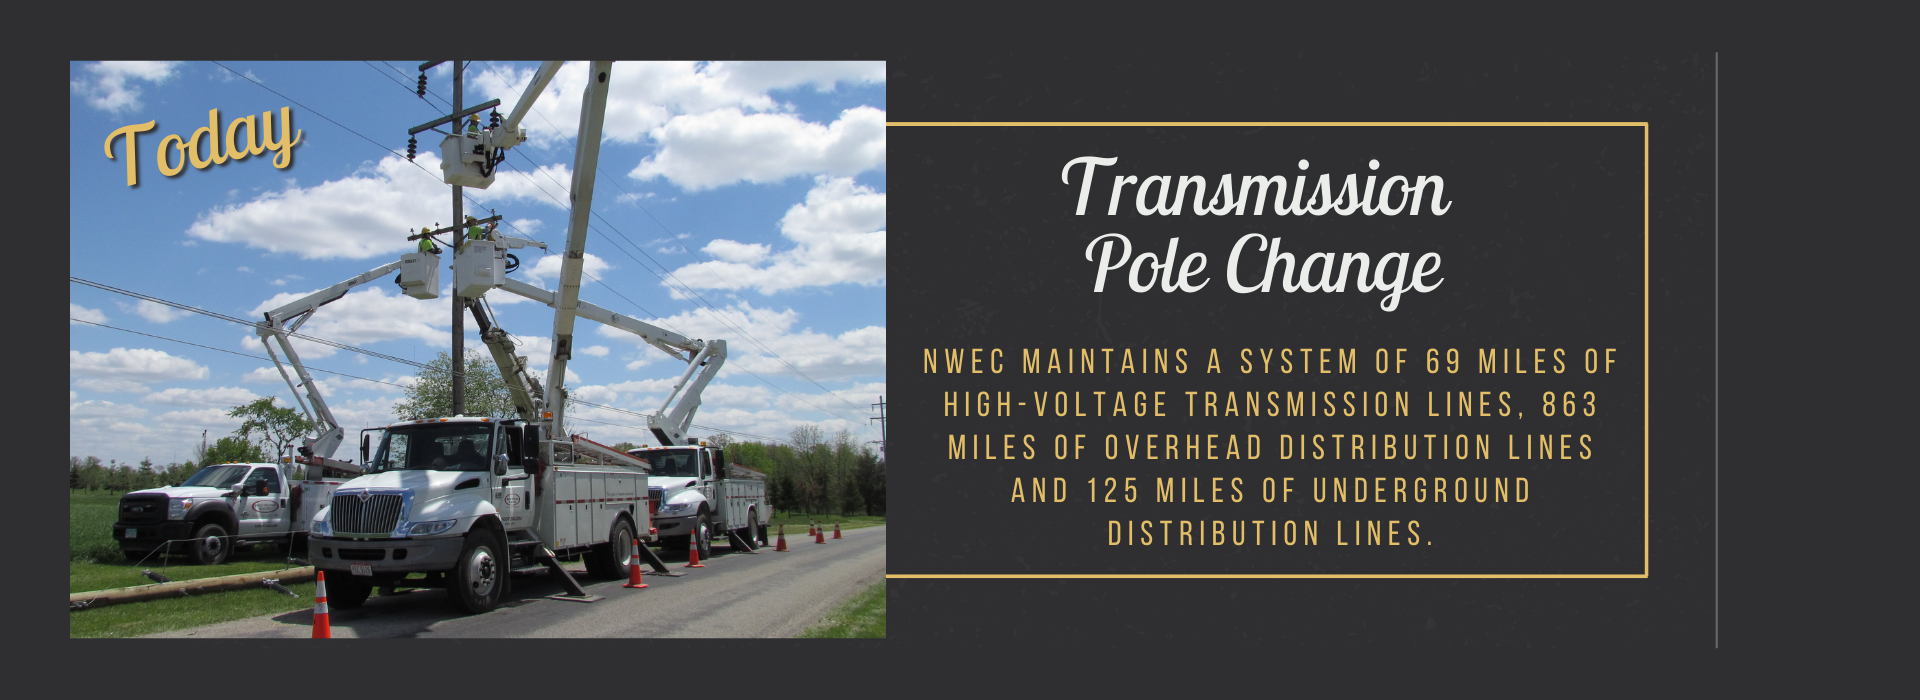 NWEC MAINTAINS A system of 69 miles of high-voltage transmission lines, 863 miles of overhead distribution lines and 125 miles of underground distribution lines.